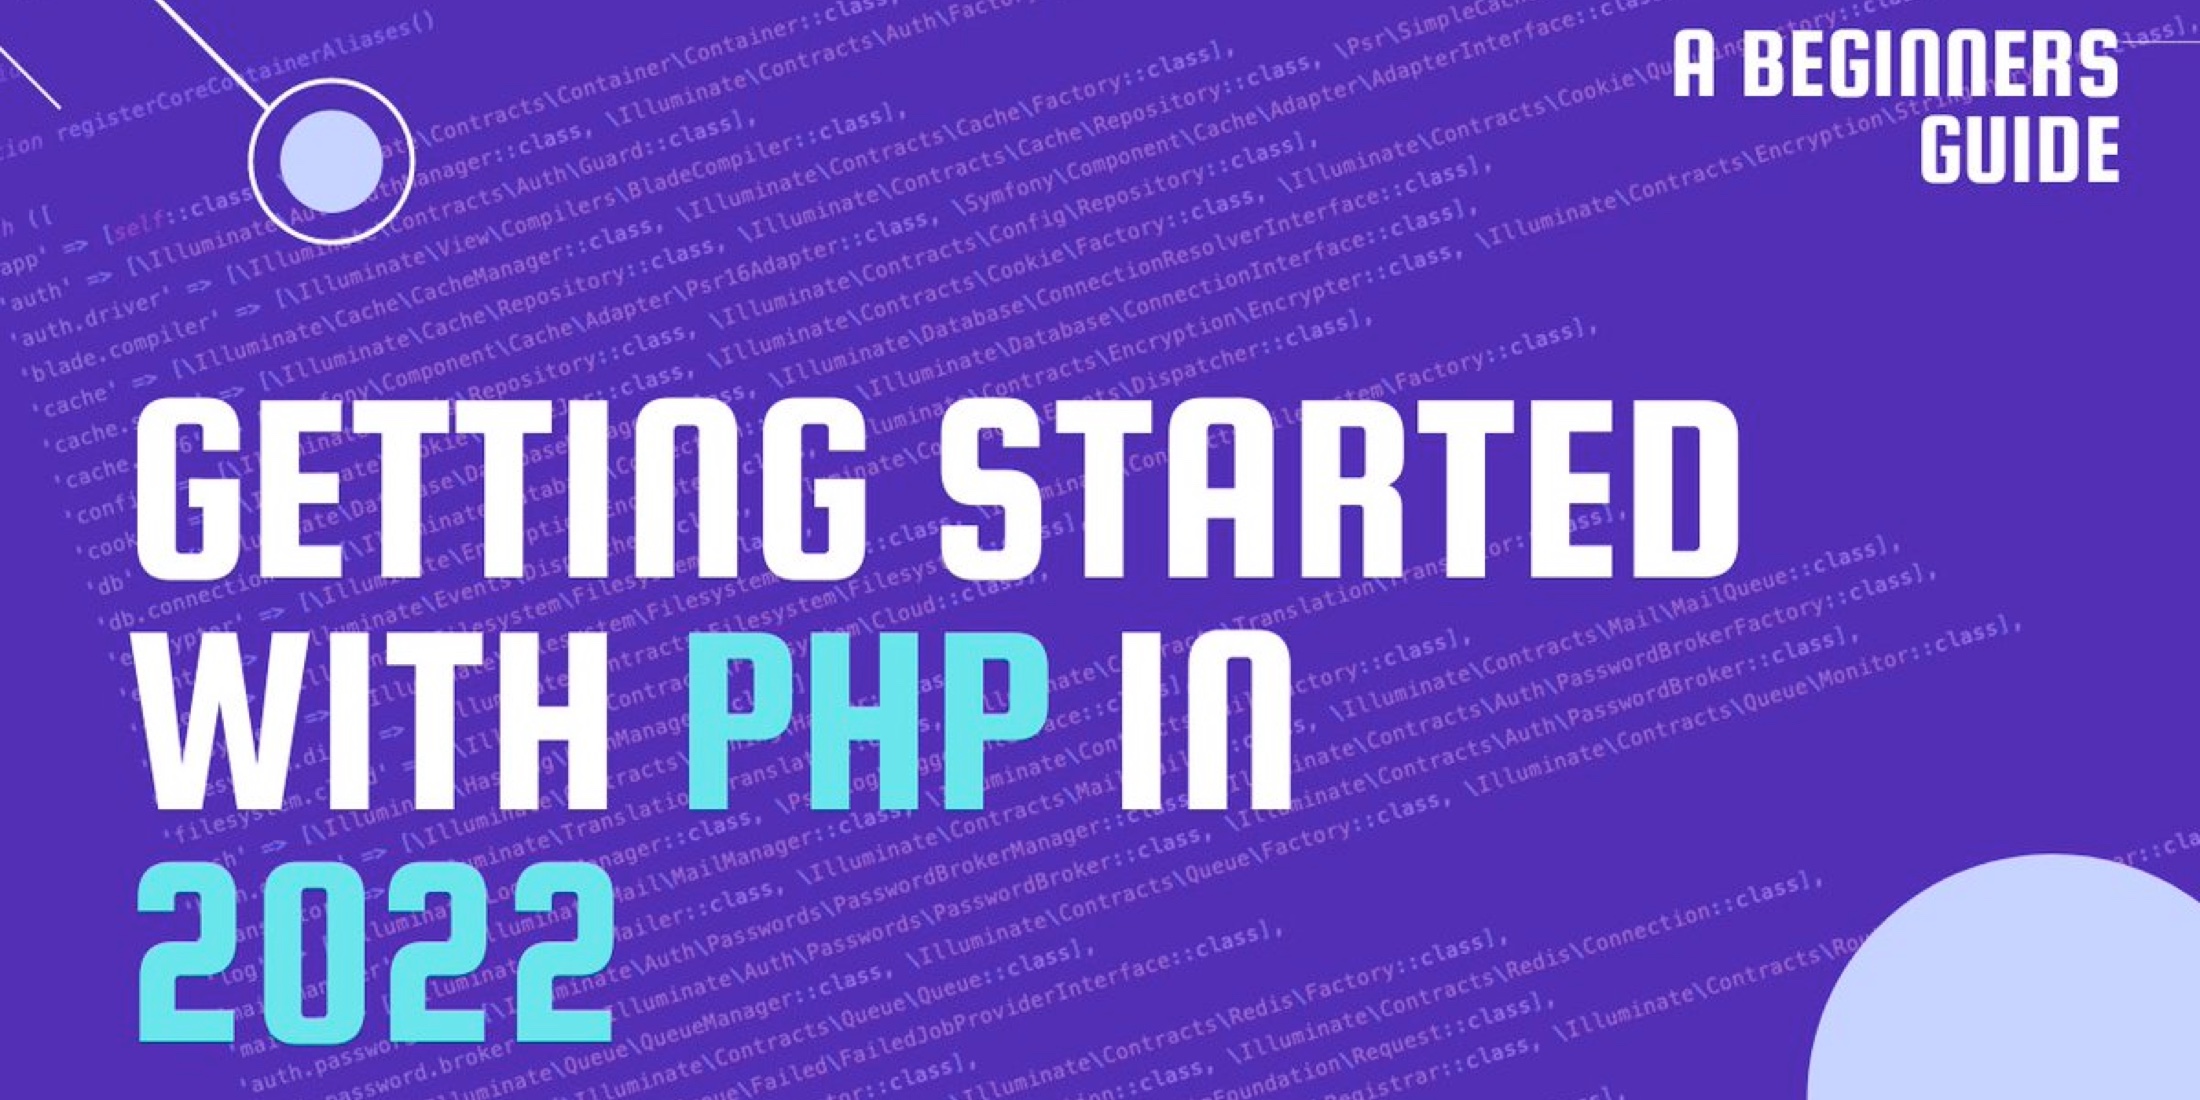 Getting Started With PHP in 2022 image